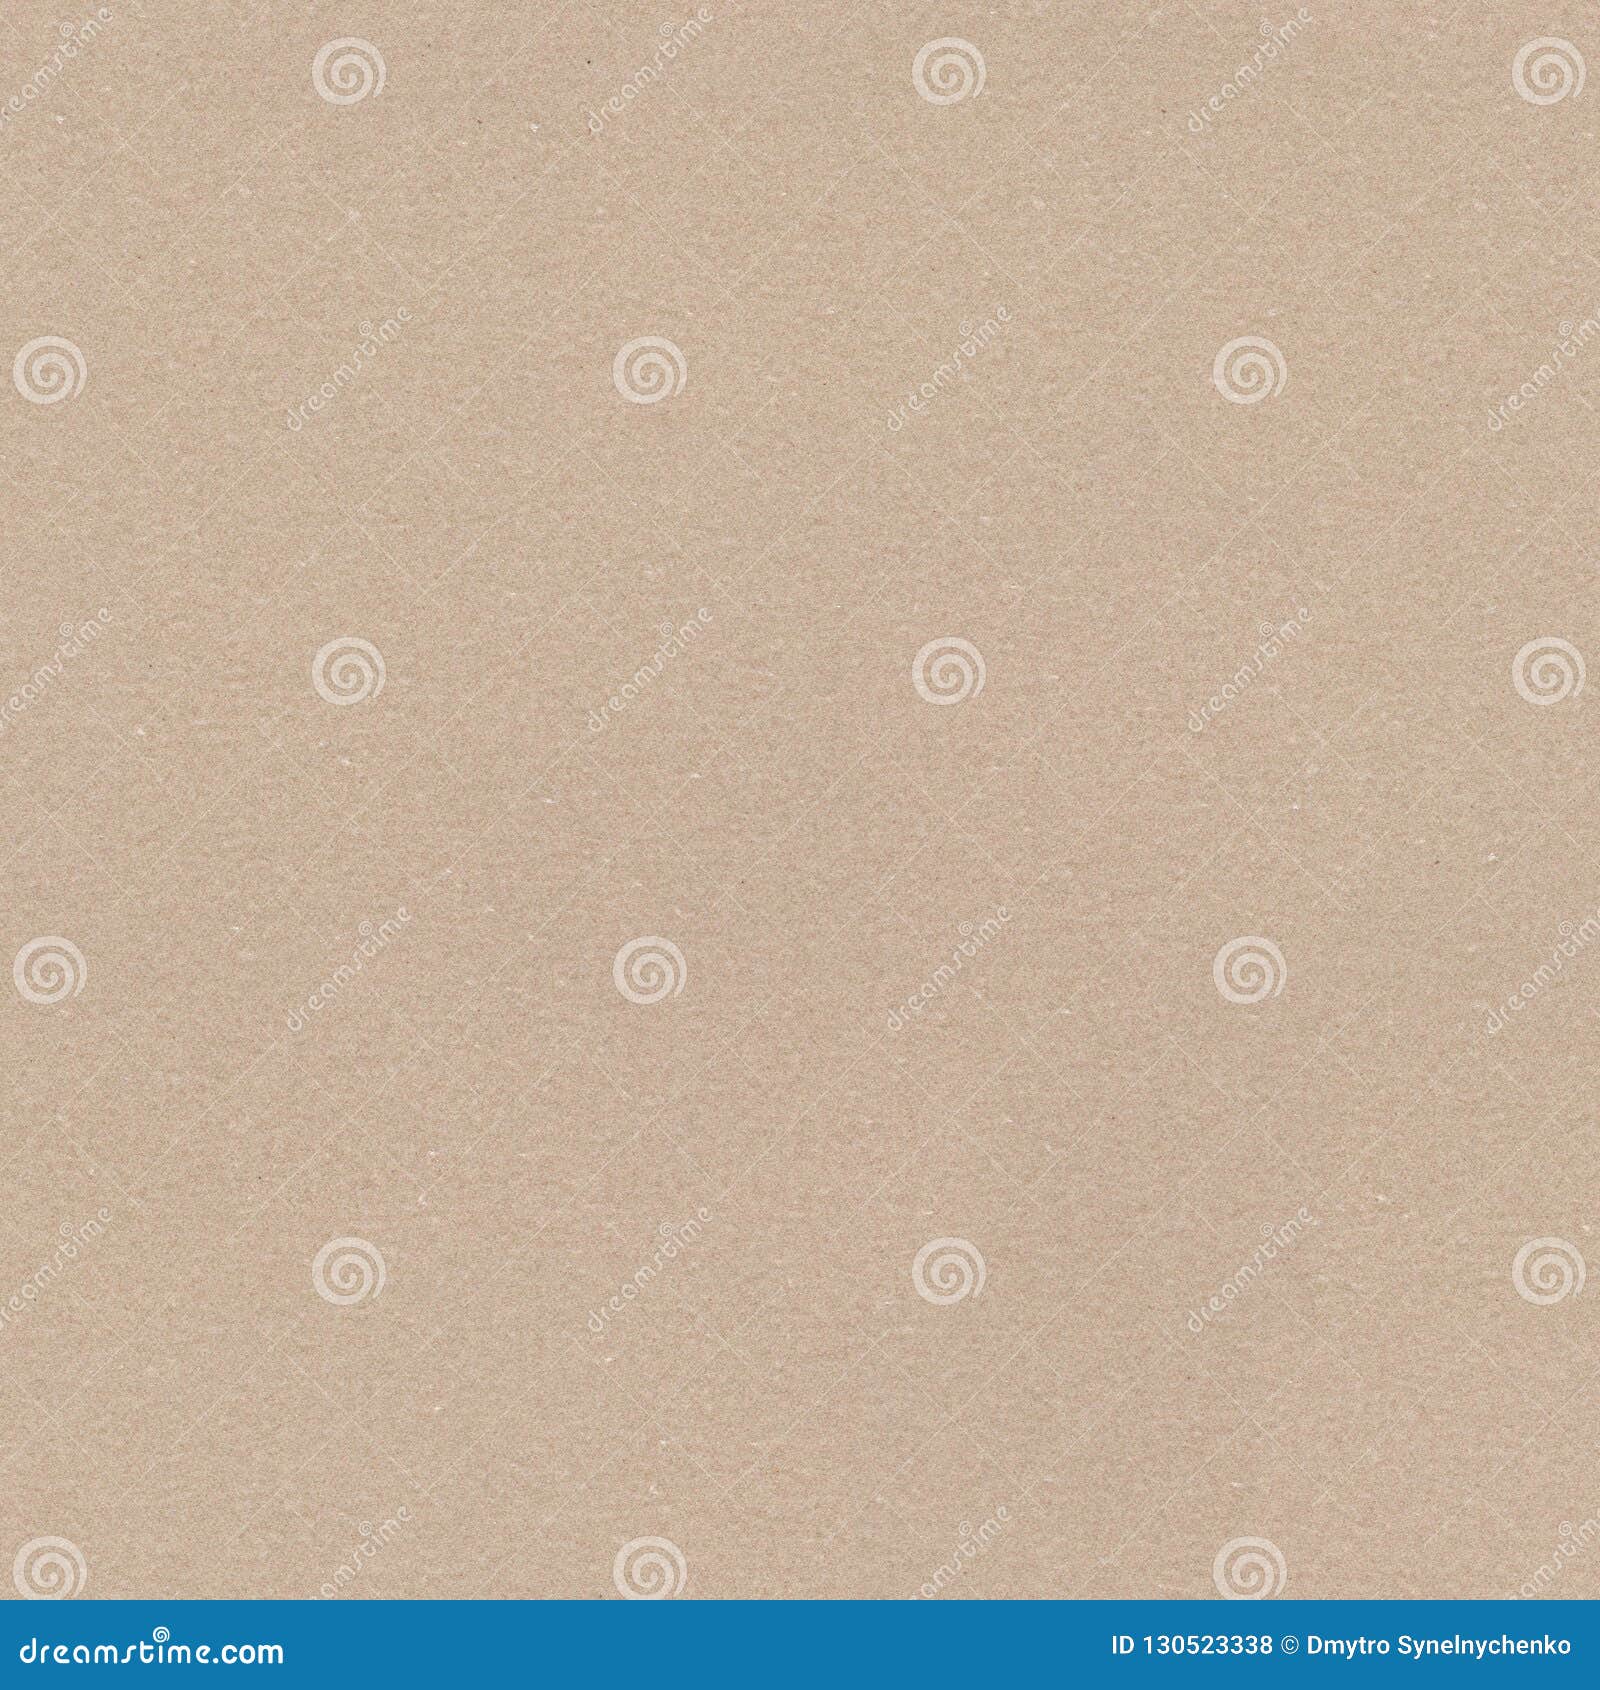 Abstract Light Beige Background Image. Seamless Square Texture